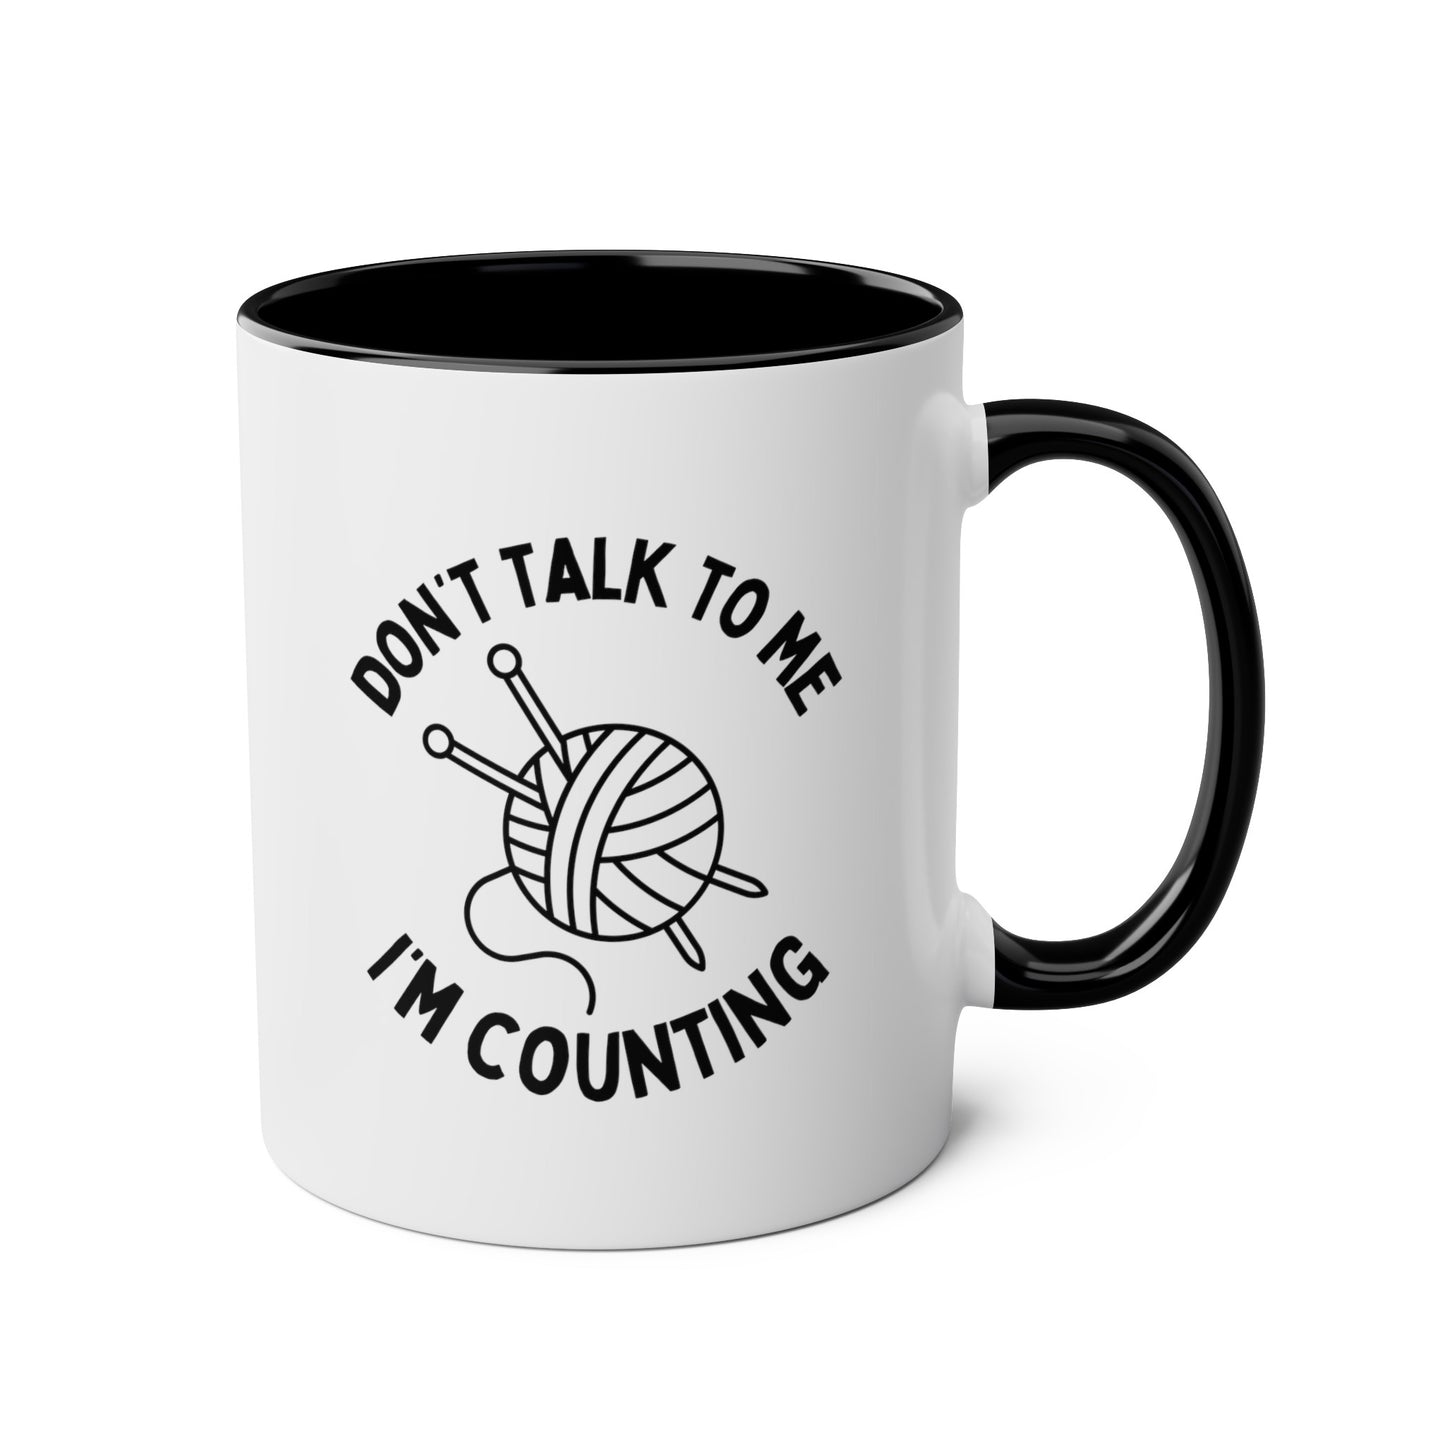 Don't Talk To Me I'm Counting 11oz white with black accent funny large coffee mug gift for knitter knitting crochet crocheter knit hobby waveywares wavey wares wavywares wavy wares